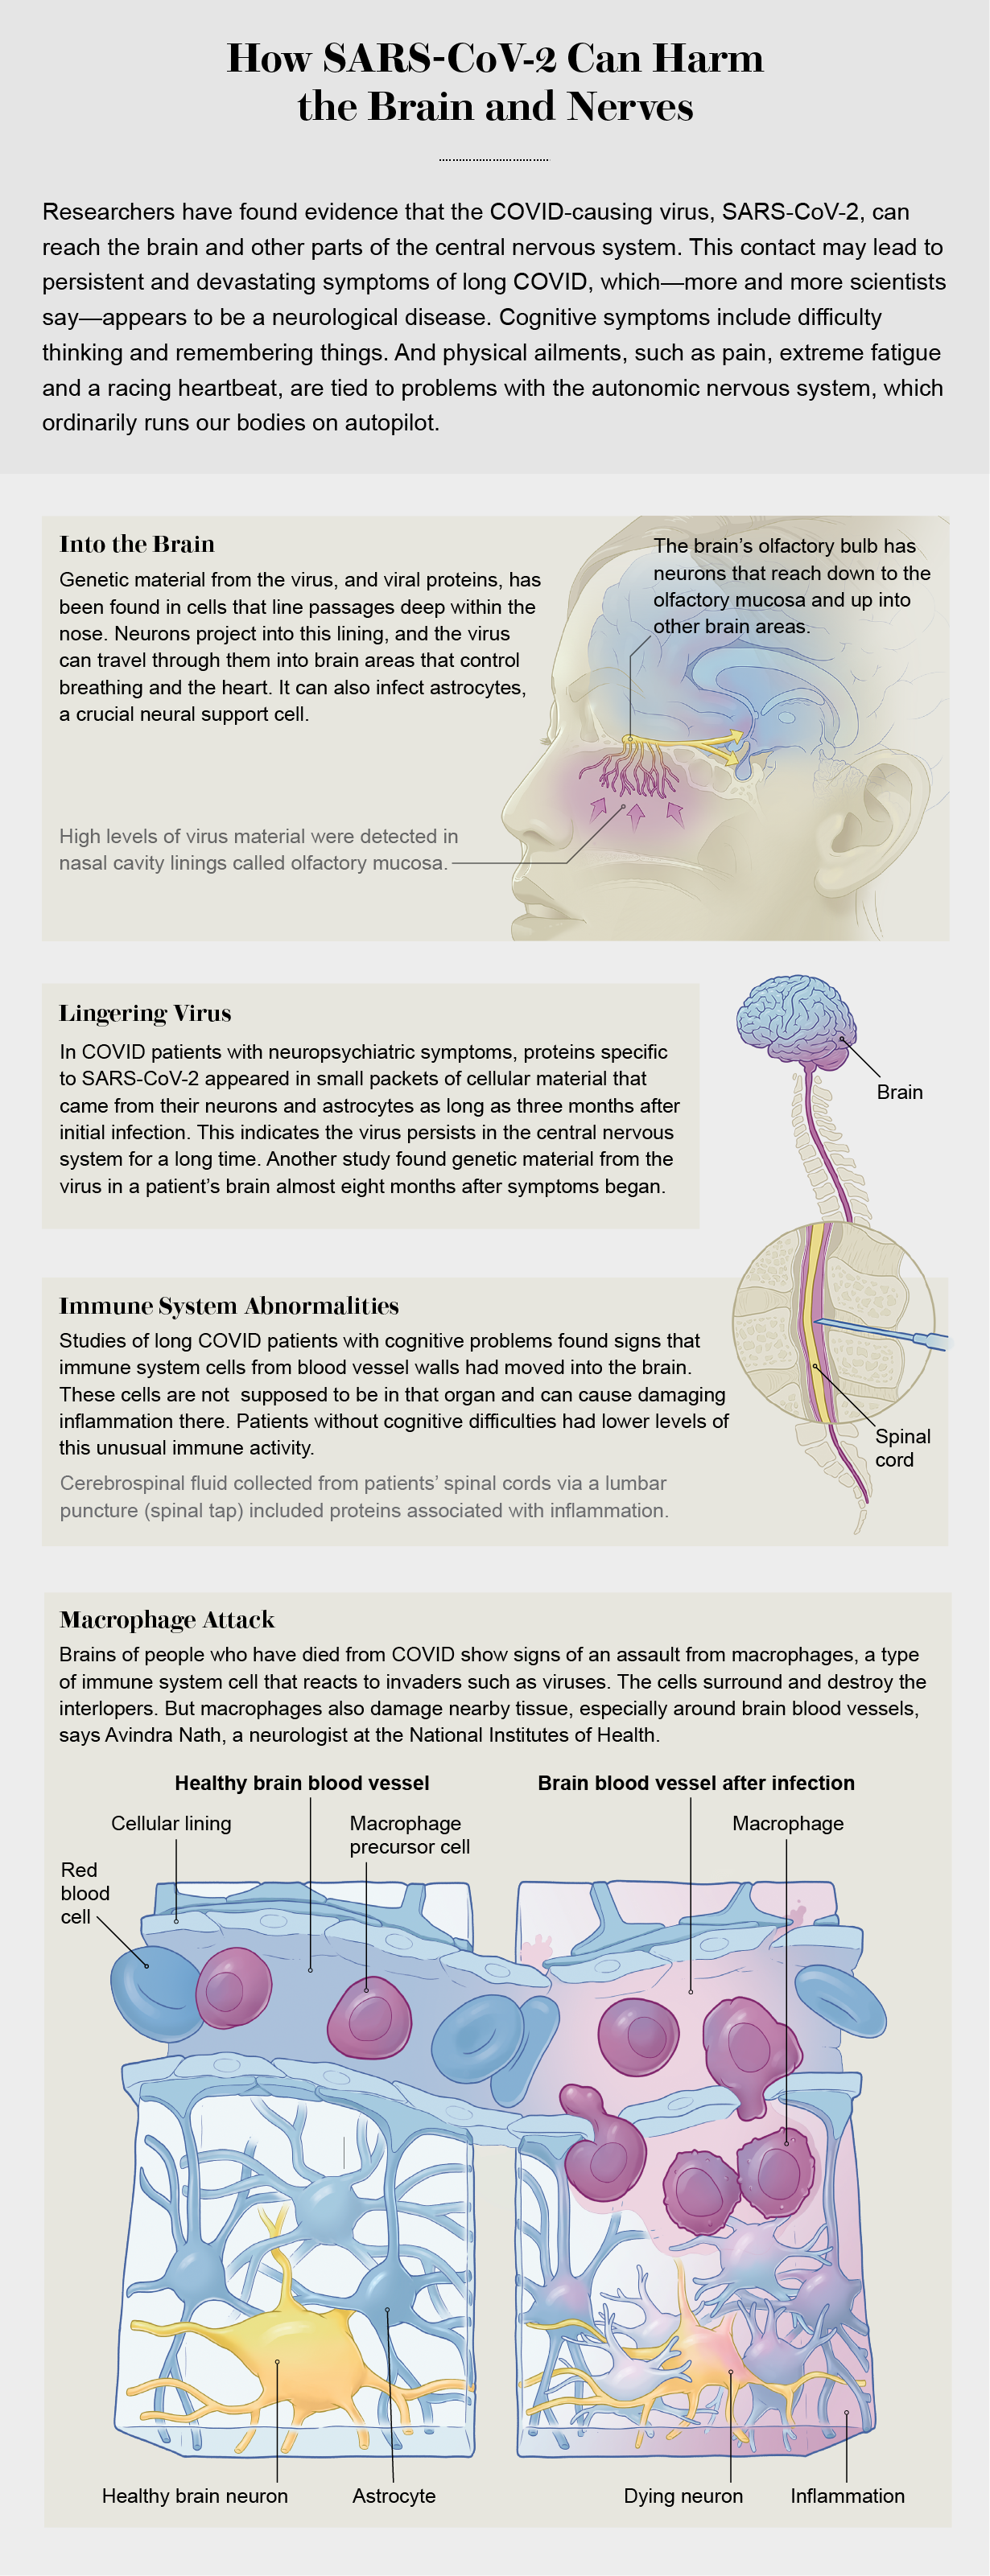 Graphic highlights various ways SARS-CoV-2 can affect the brain and nerves, either by accessing and lingering in nervous system tissues or by stimulating the immune system to react in ways that damage the brain.